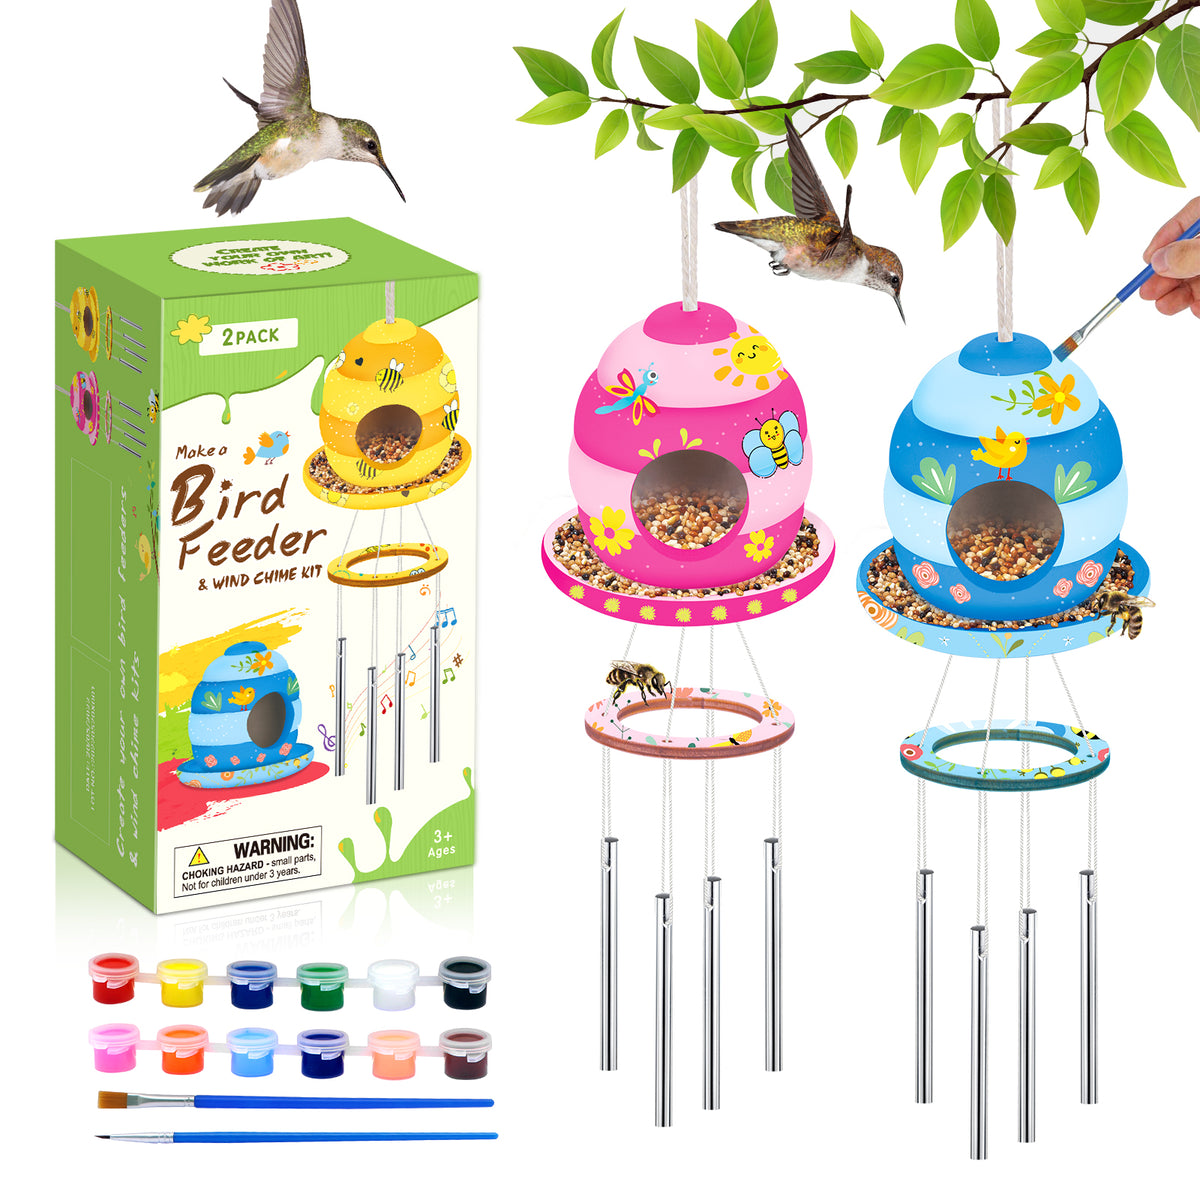 2-Pack Arts and Crafts for Kids, Make Your Own Bird Feeder & Wind